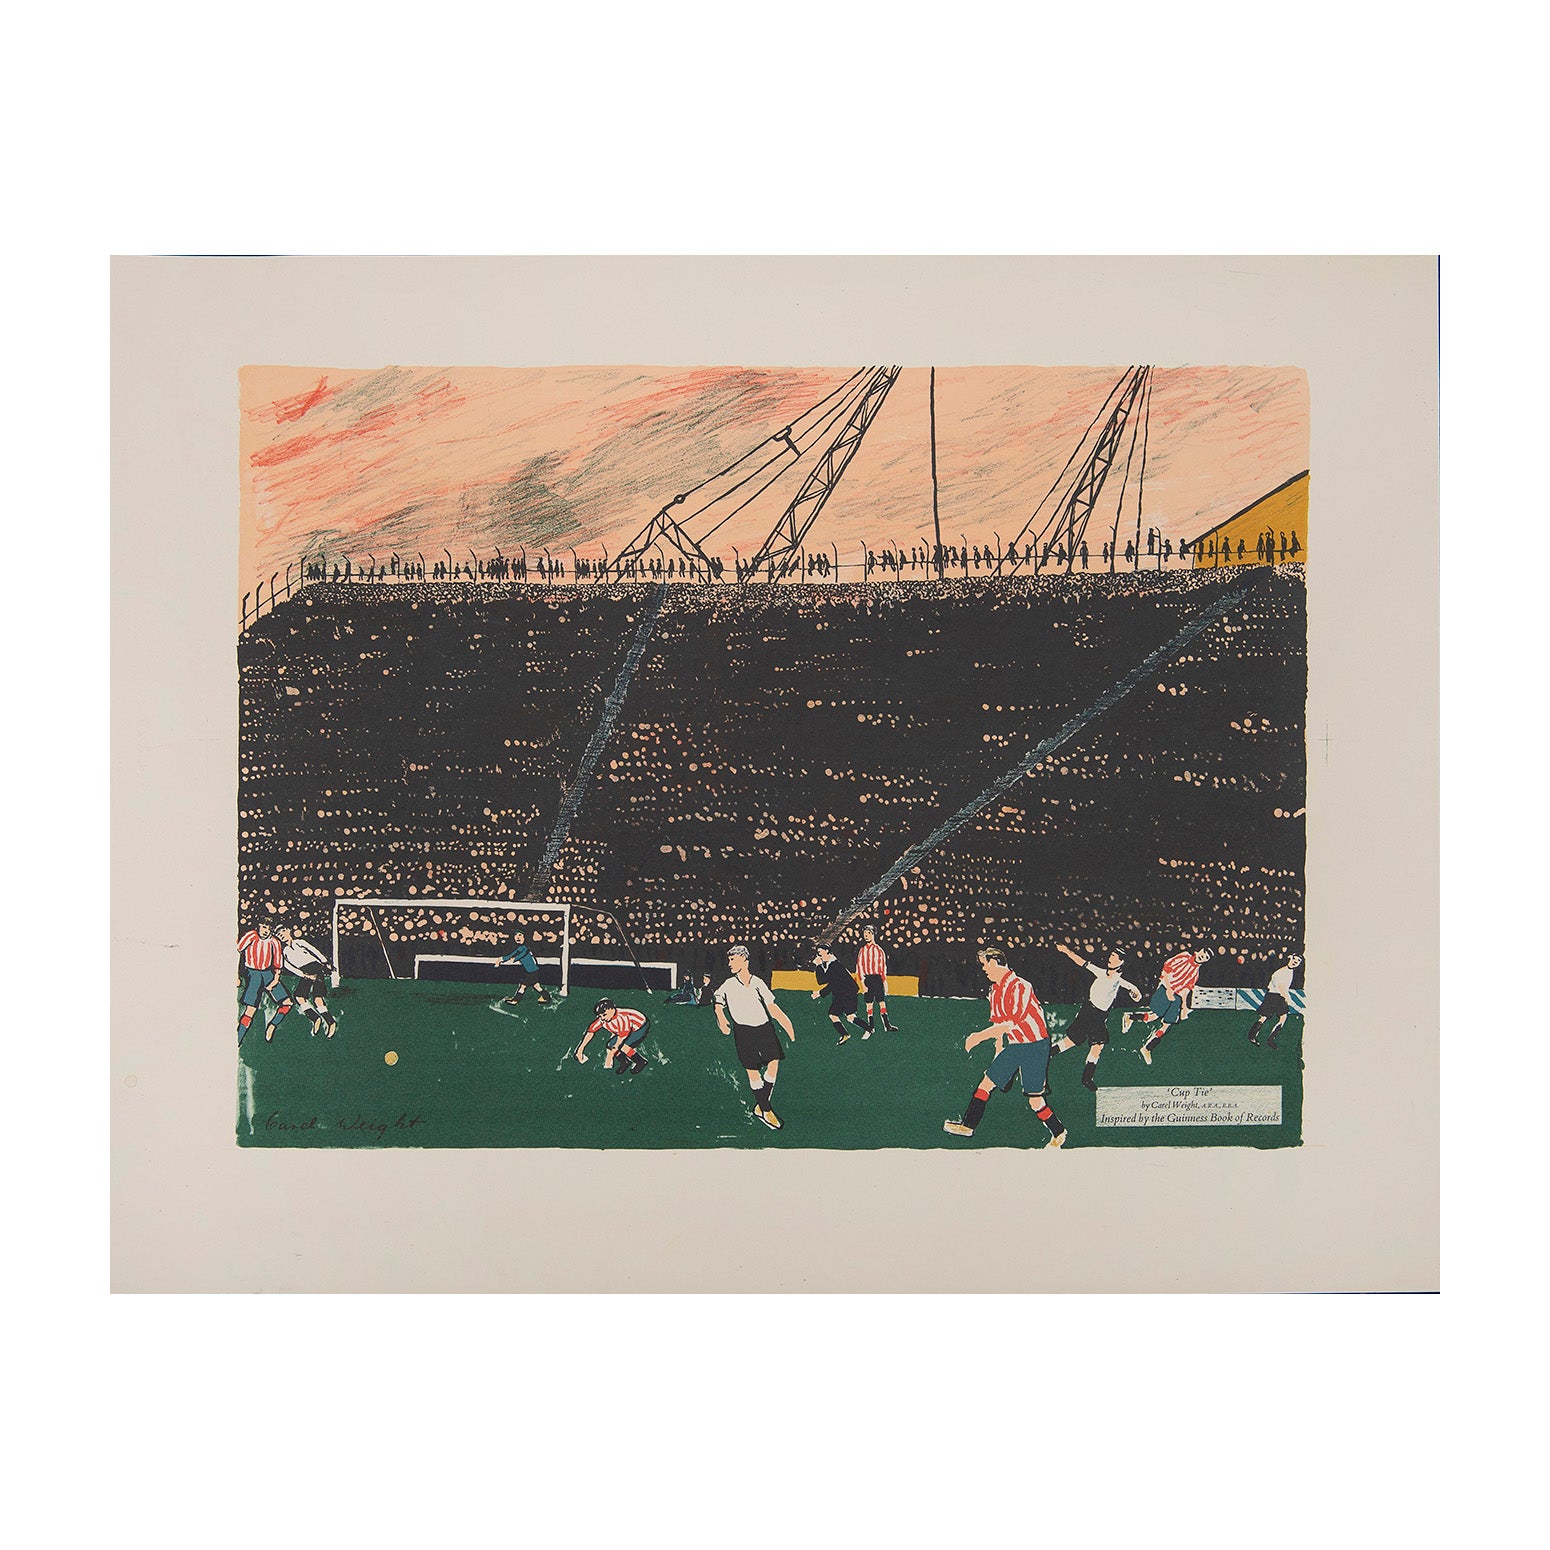 Guinness Lithograph, Cup Tie by Carel Weight, printed by the Curwen Studio and published in 1962. 